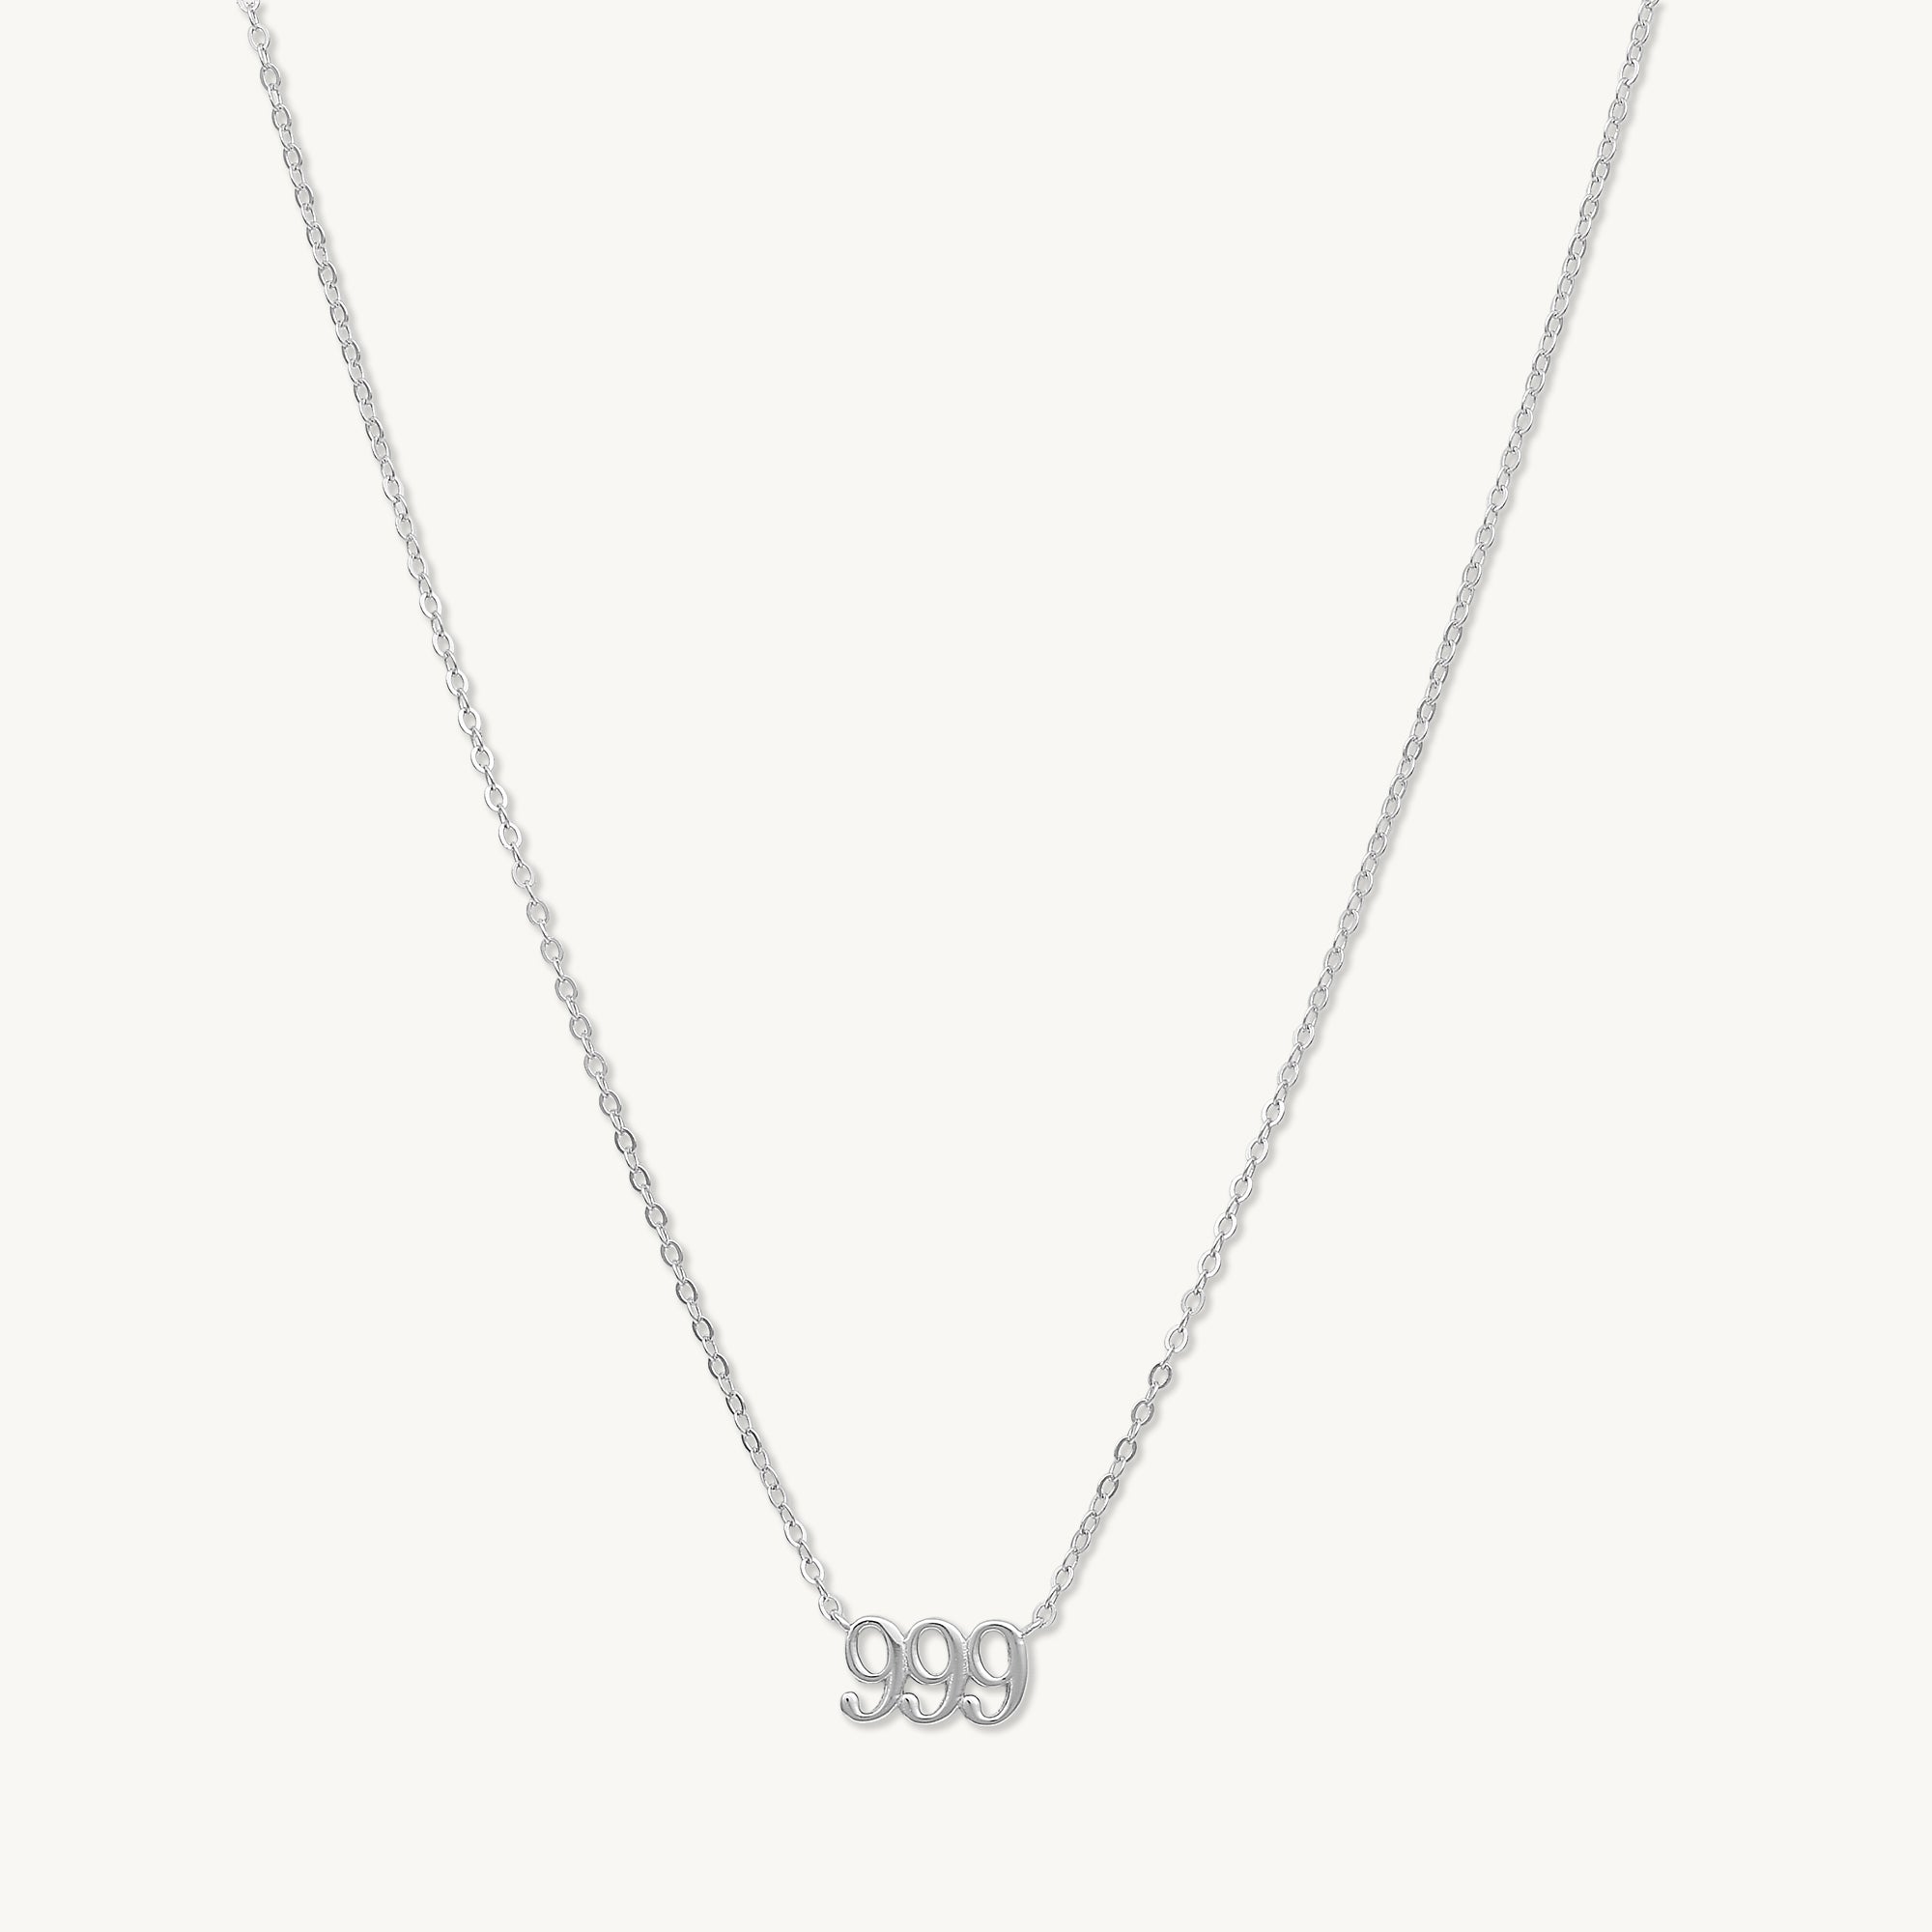 999 Angel Number Pendant Necklace